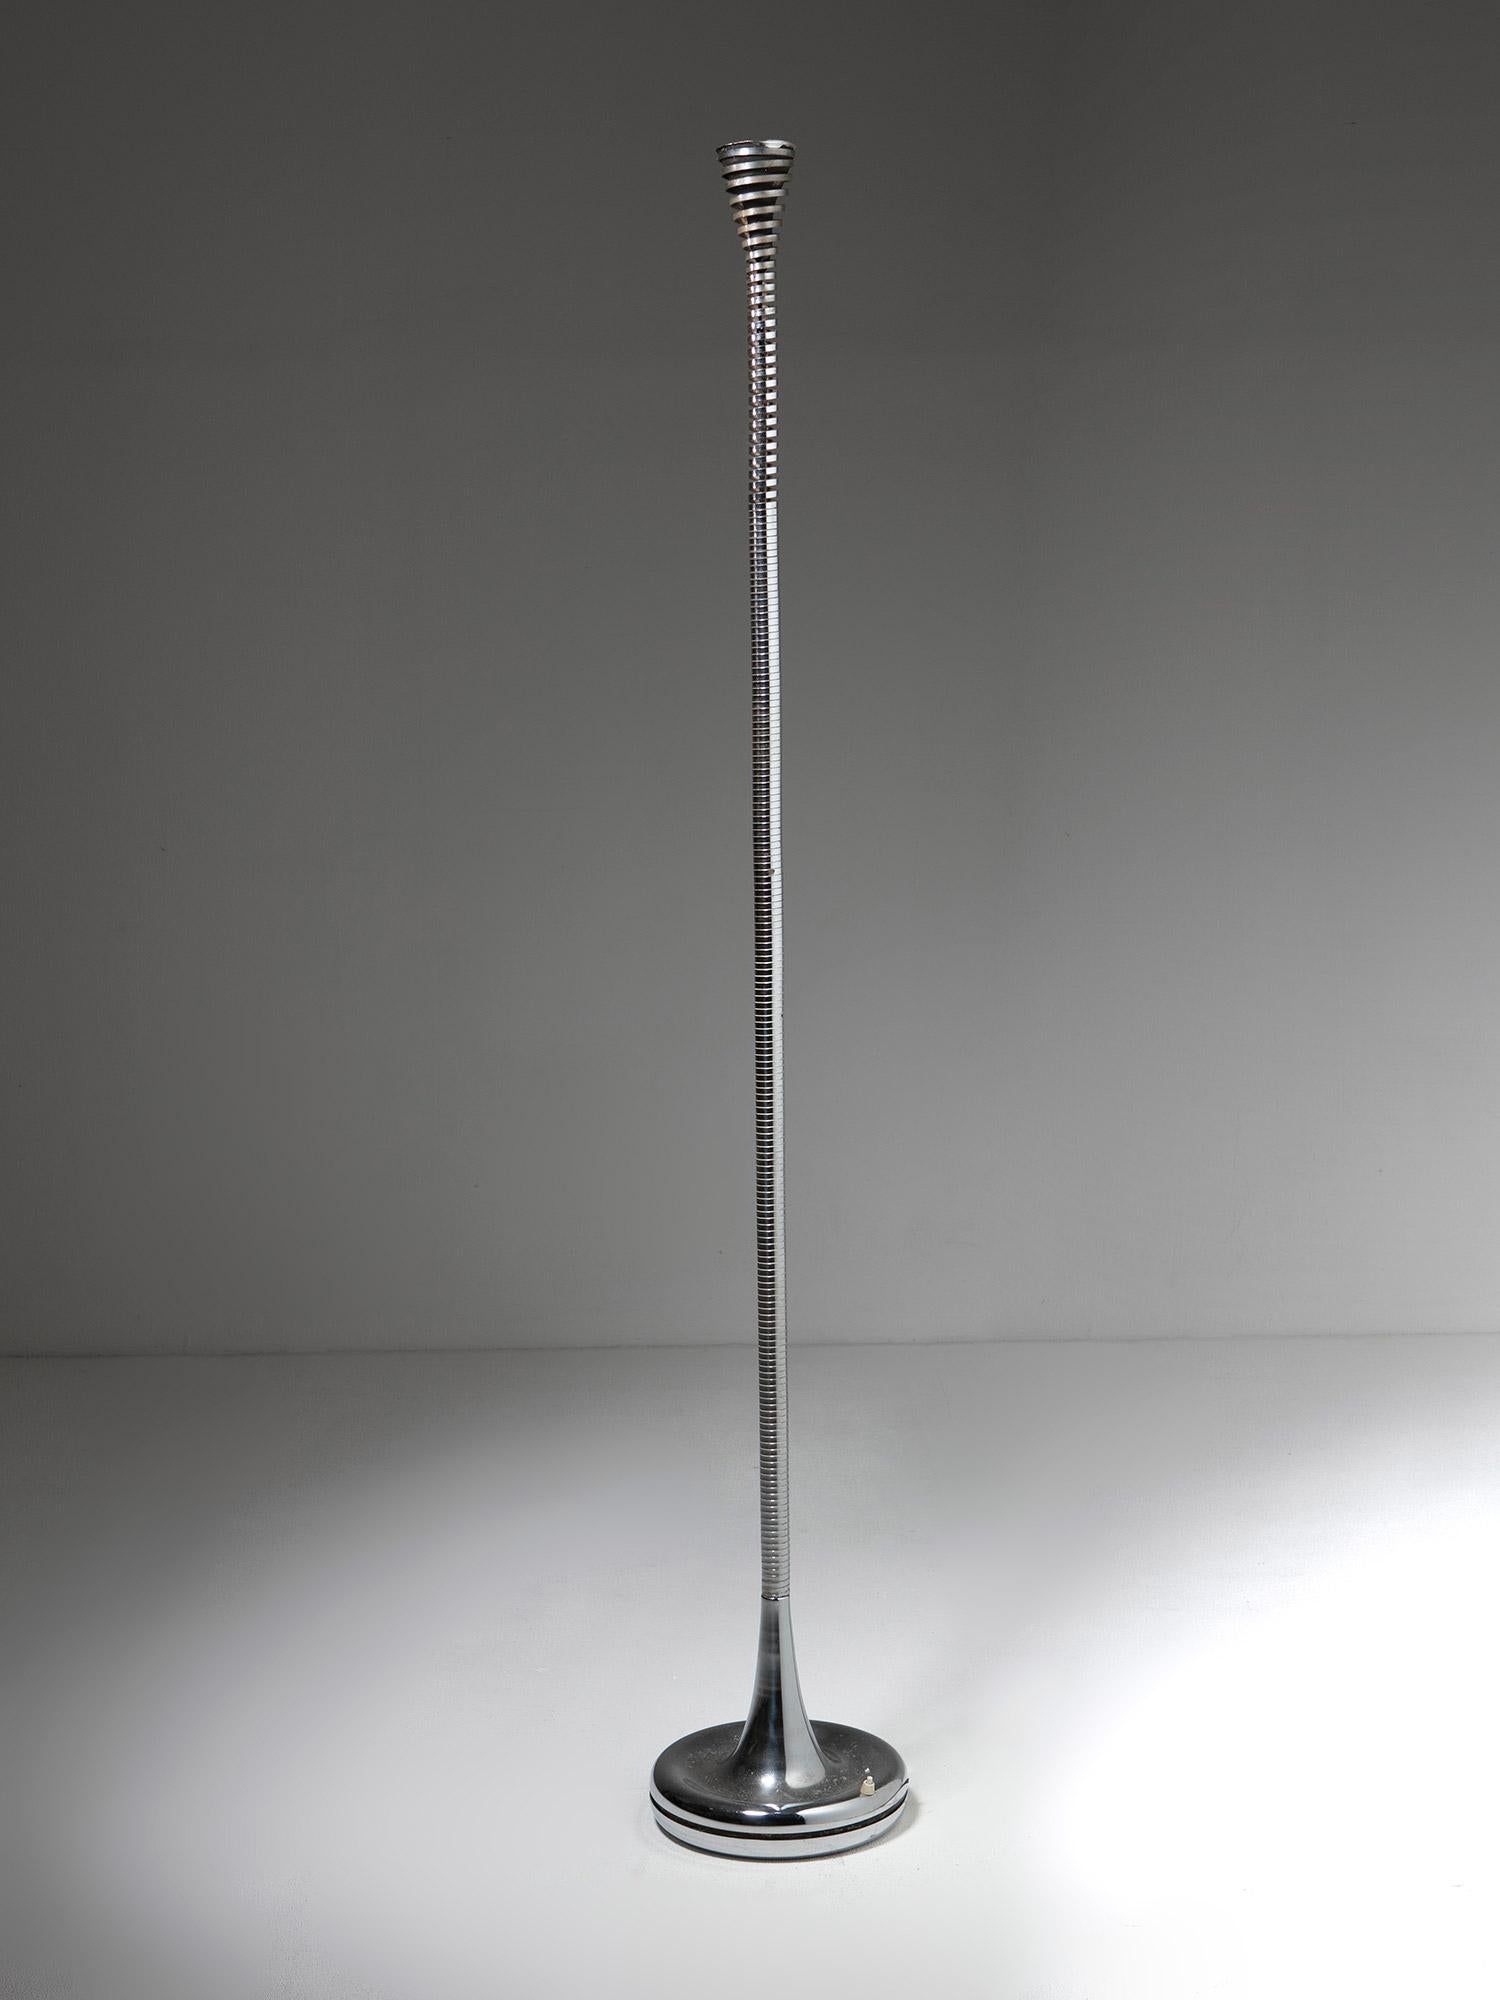 Molla Model D901 floor lamp by Eleonore Peduzzi Riva for Candle.
Chrome steel lamp with halogen light source.